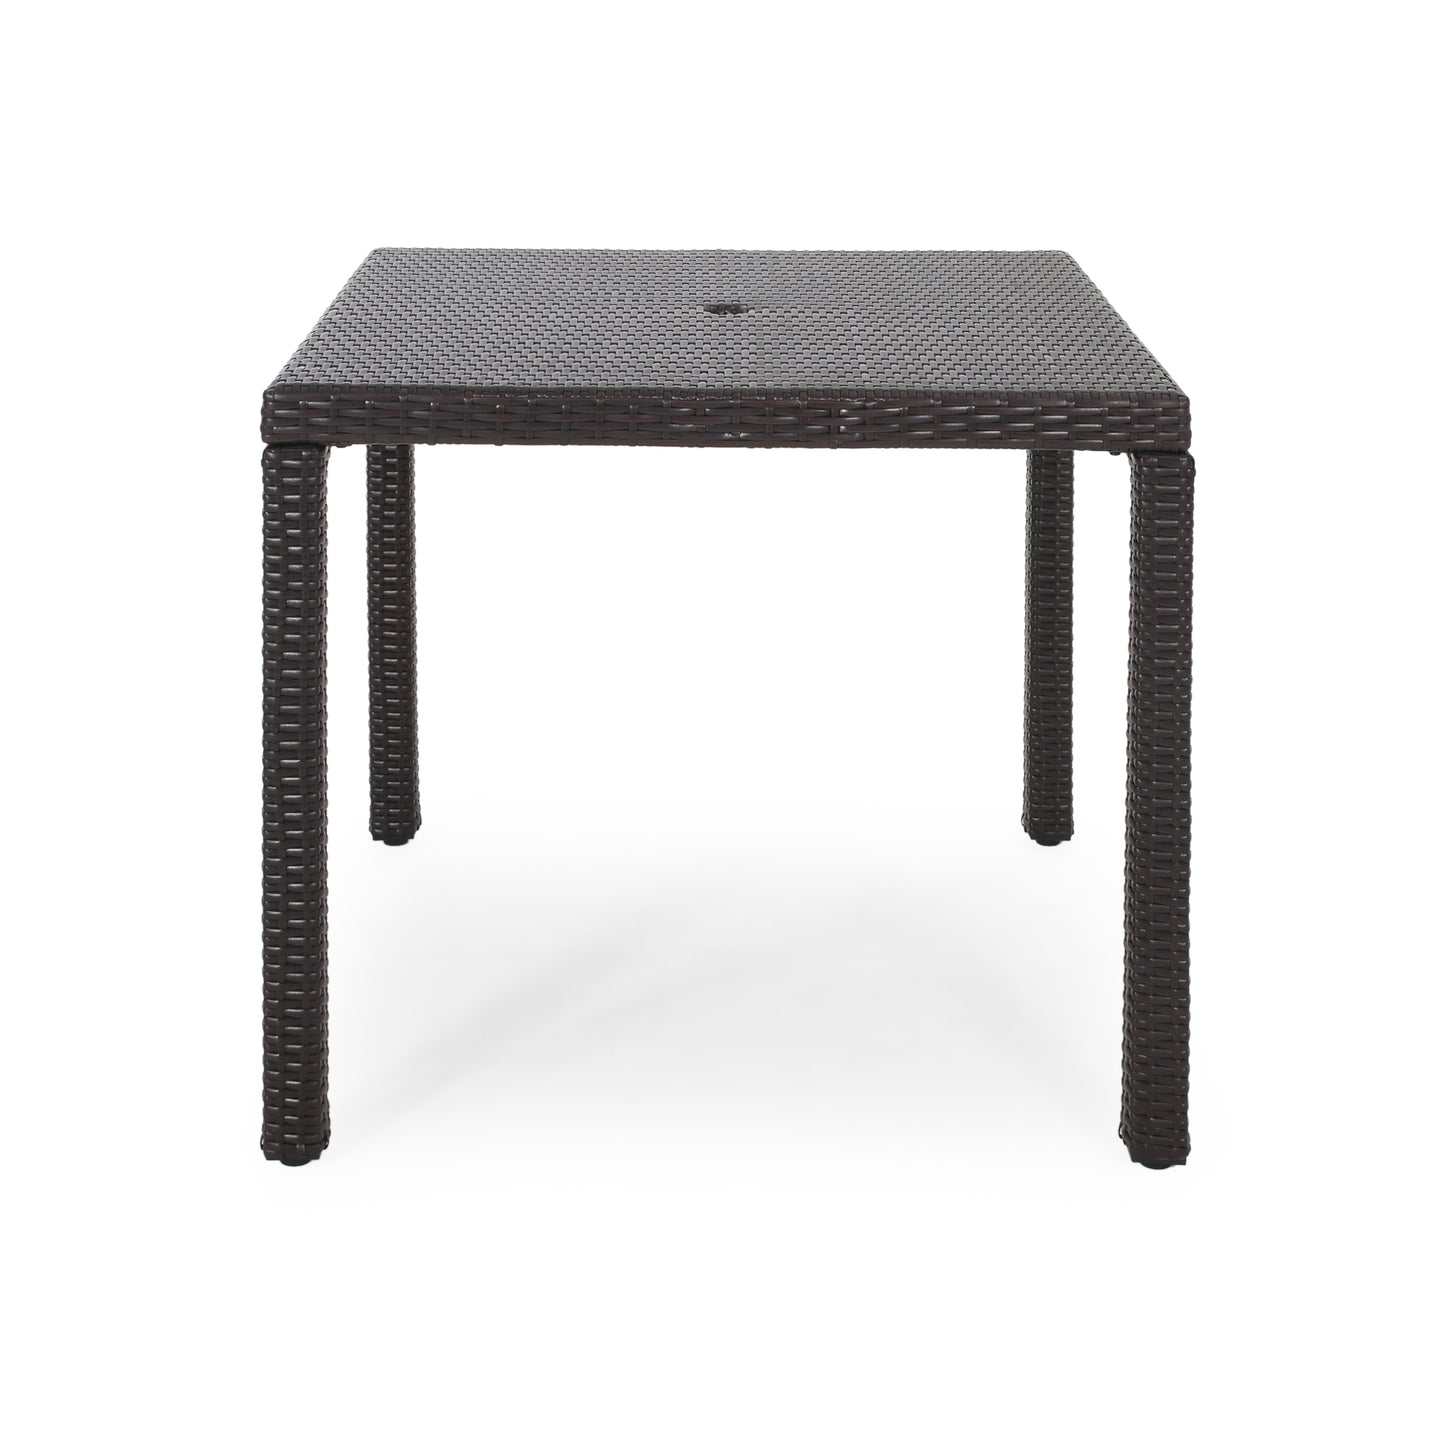 Edene Outdoor Multibrown Wicker Square Dining Table